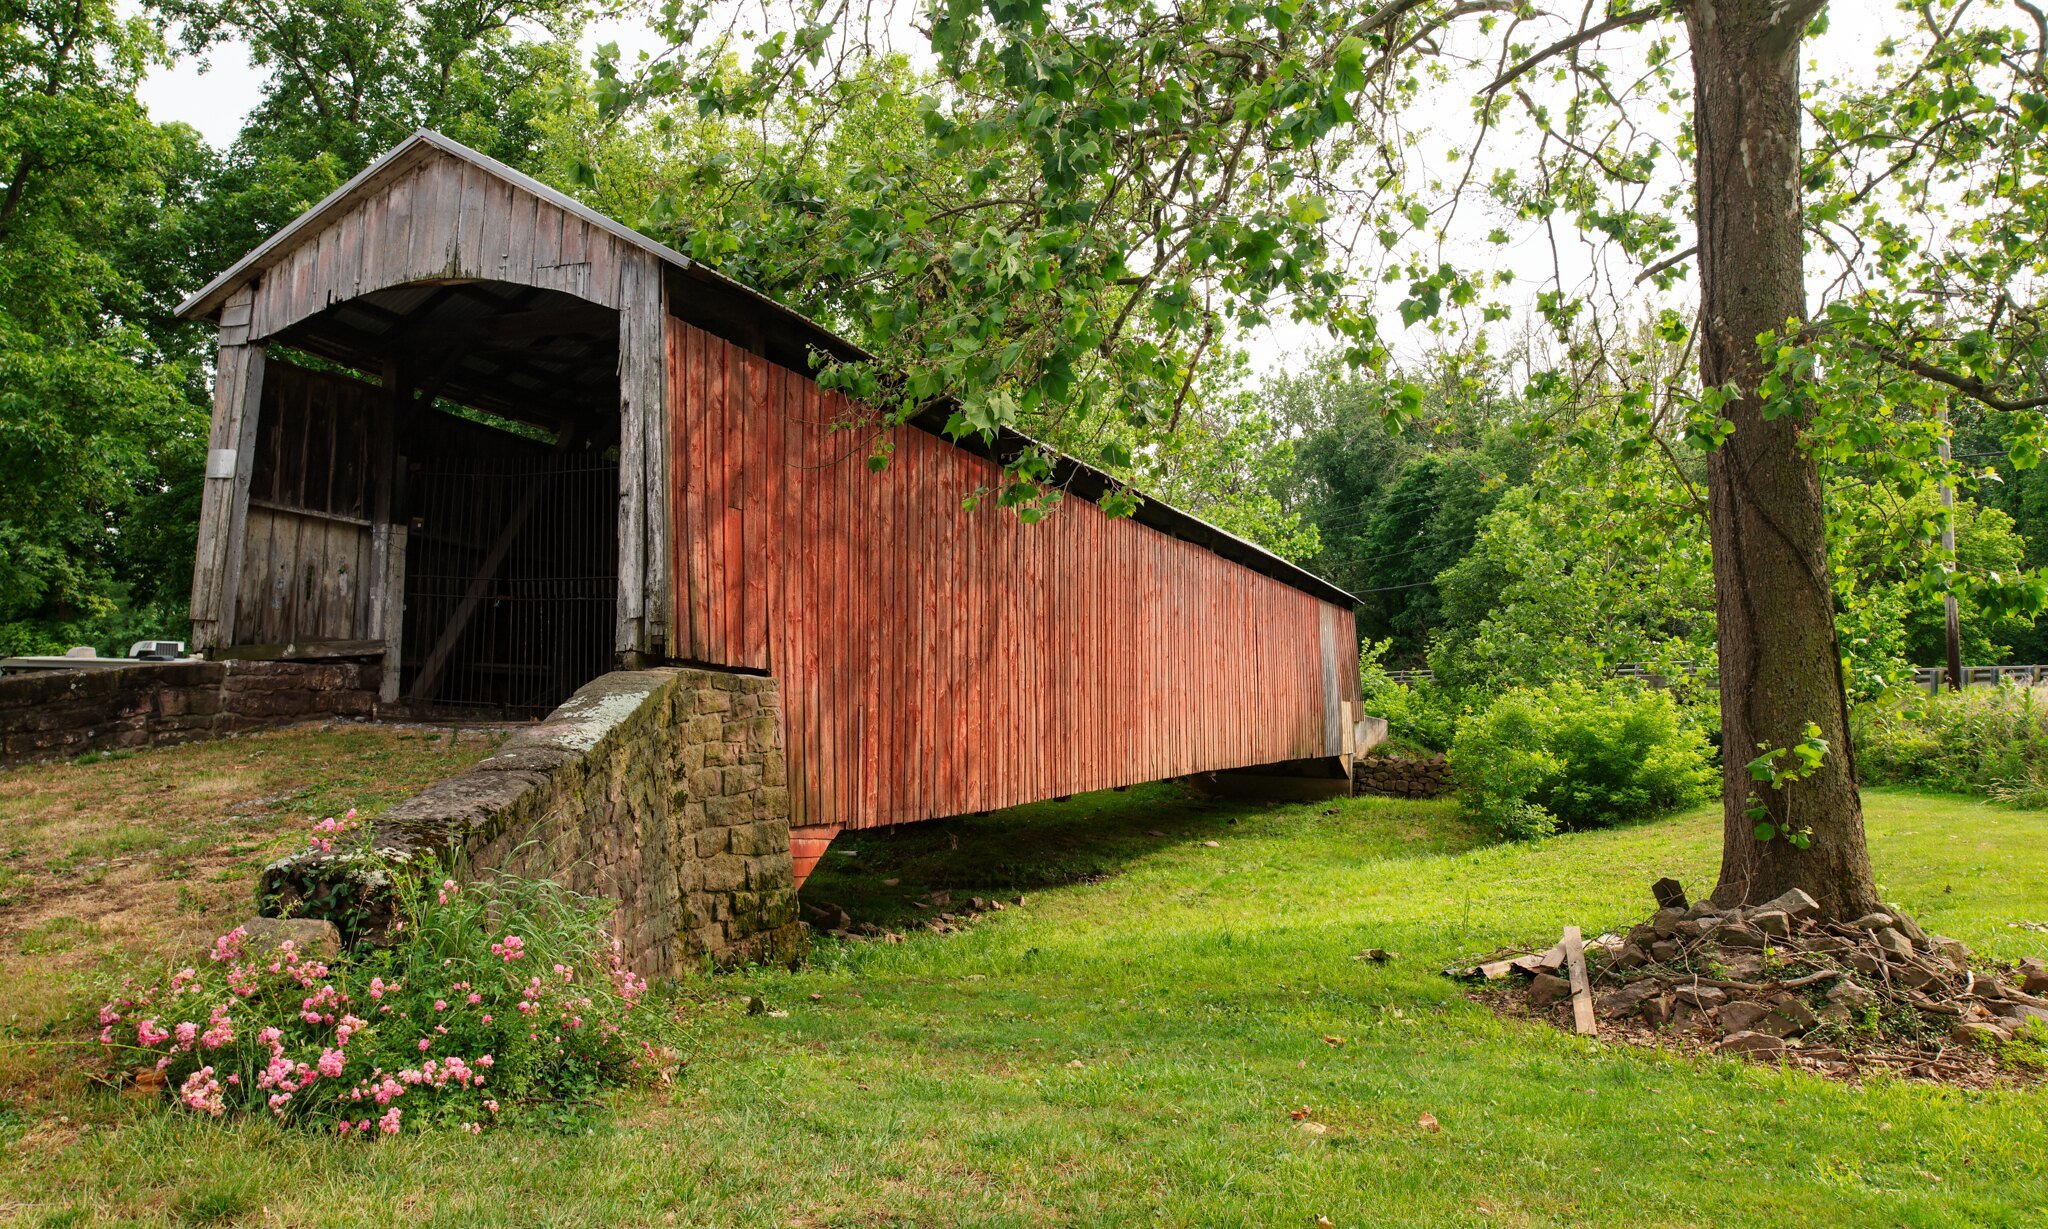  Red Run Covered Bridge, Earl Township, Lancaster County, PA.  Built in 1866. 